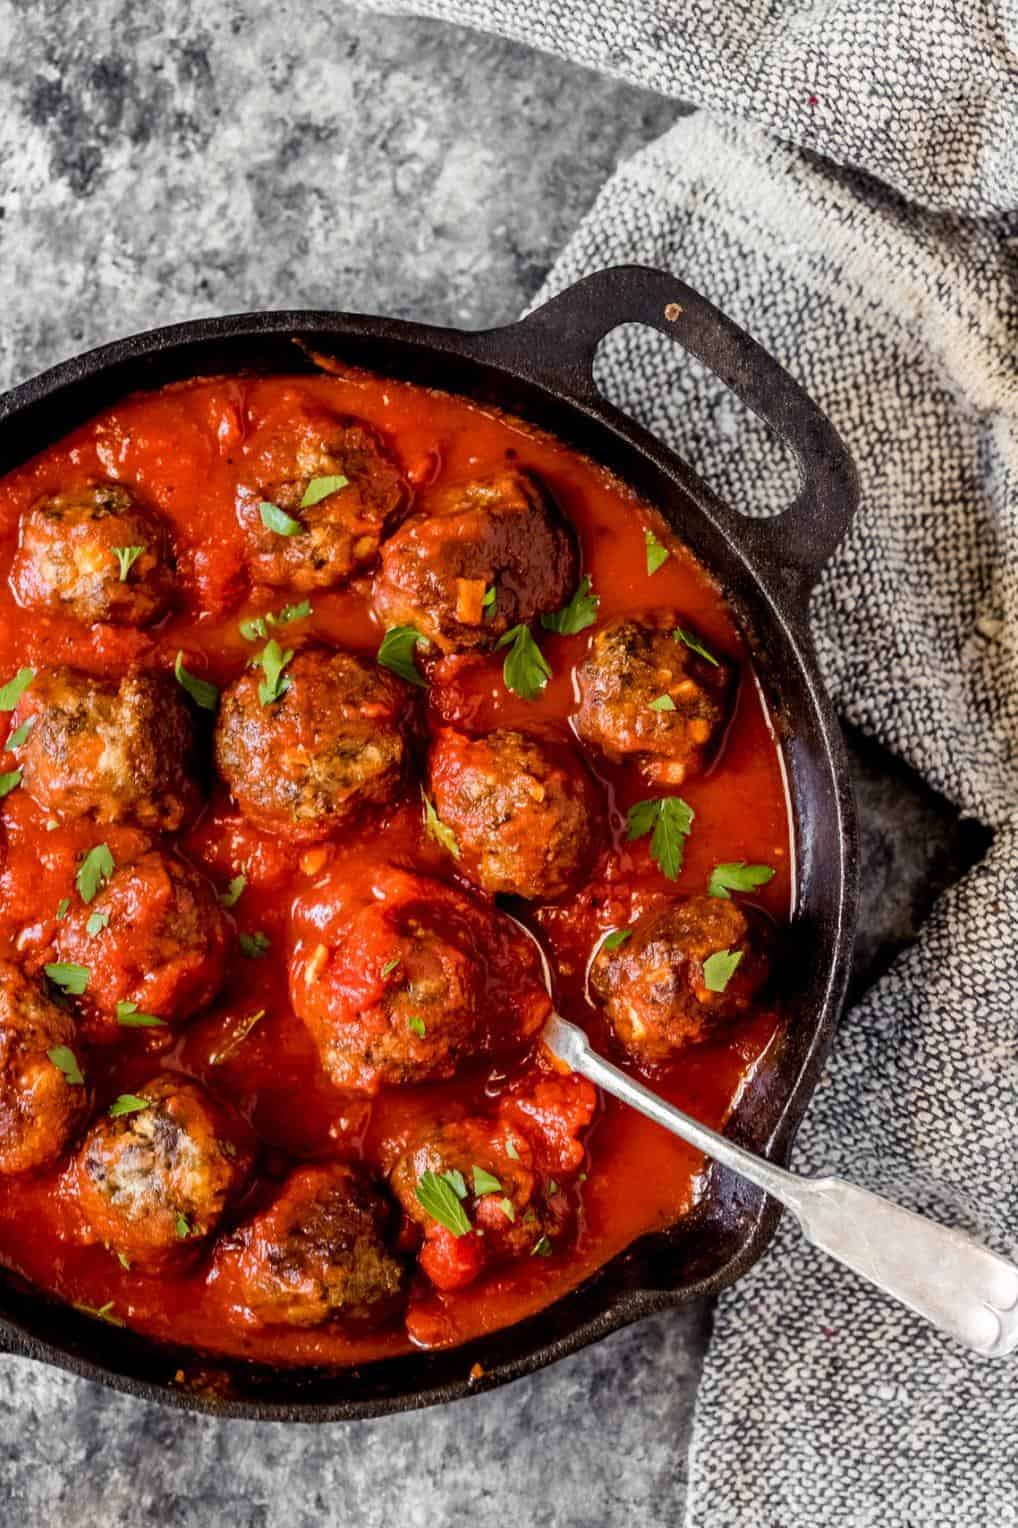  These meatballs bring a unique flavor that will transport your taste buds to the great outdoors.